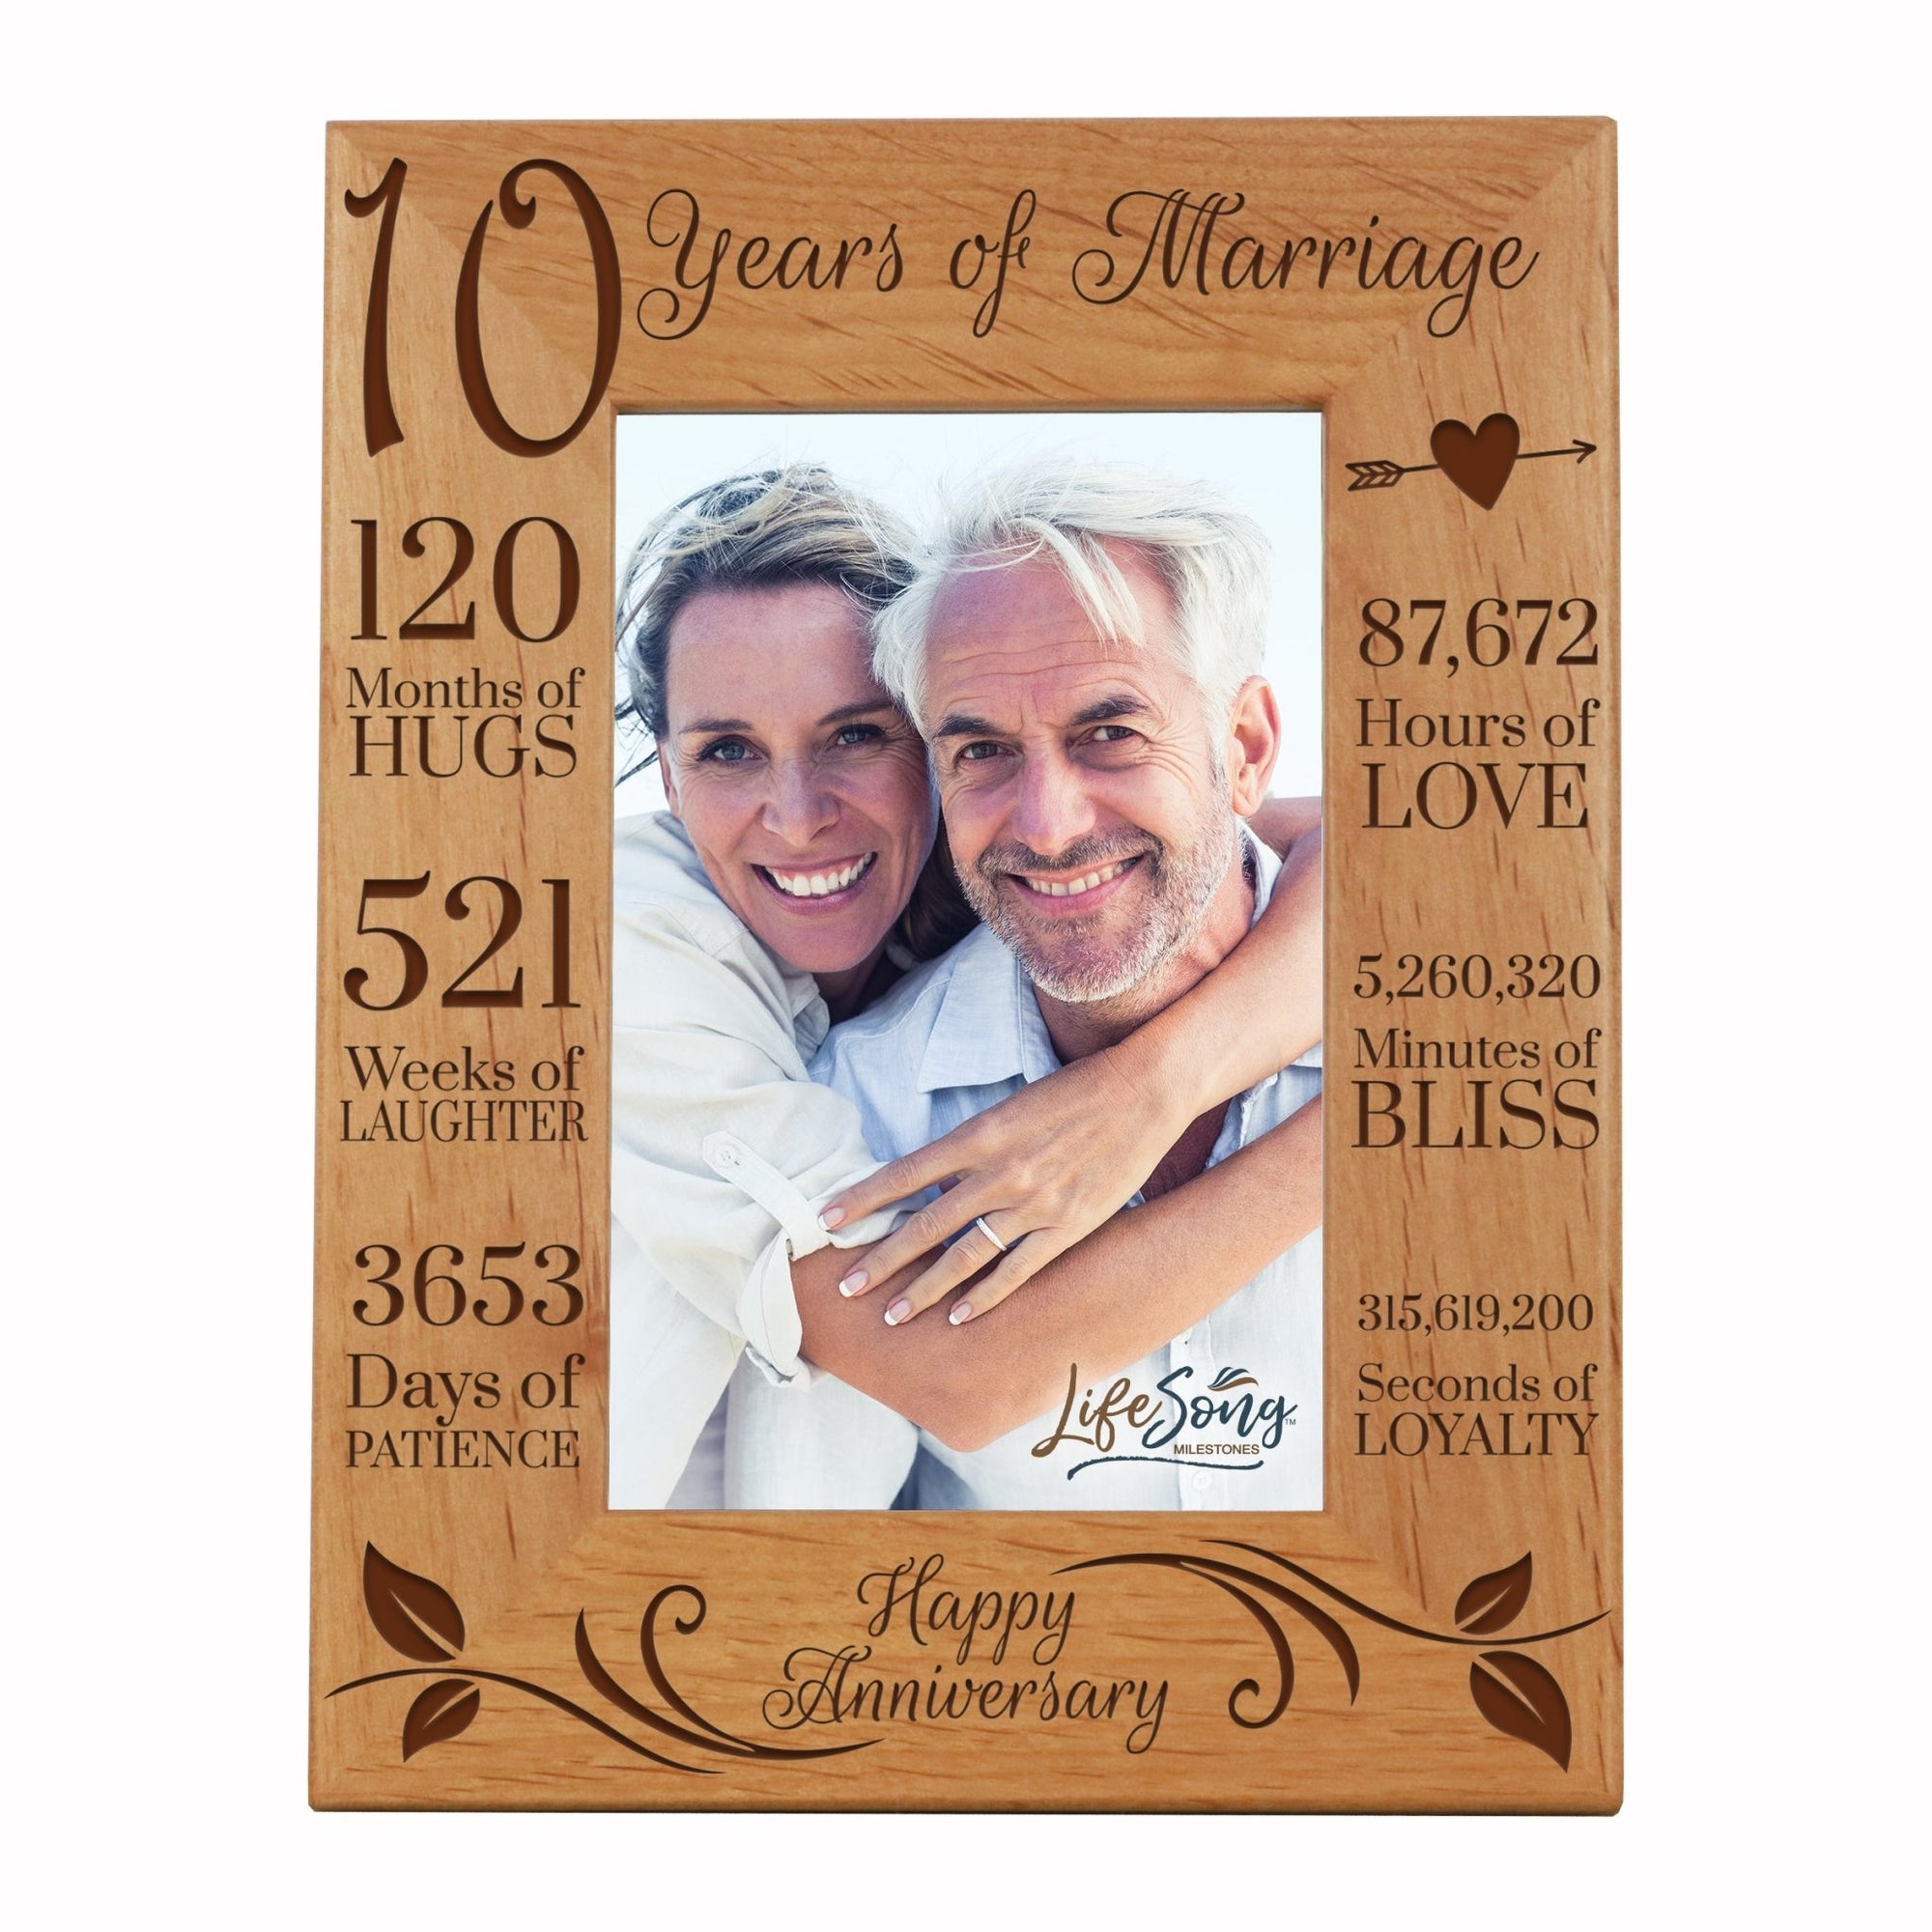 Lifesong Milestones Engraved 10th Anniversary Picture Frame Gift for Couples